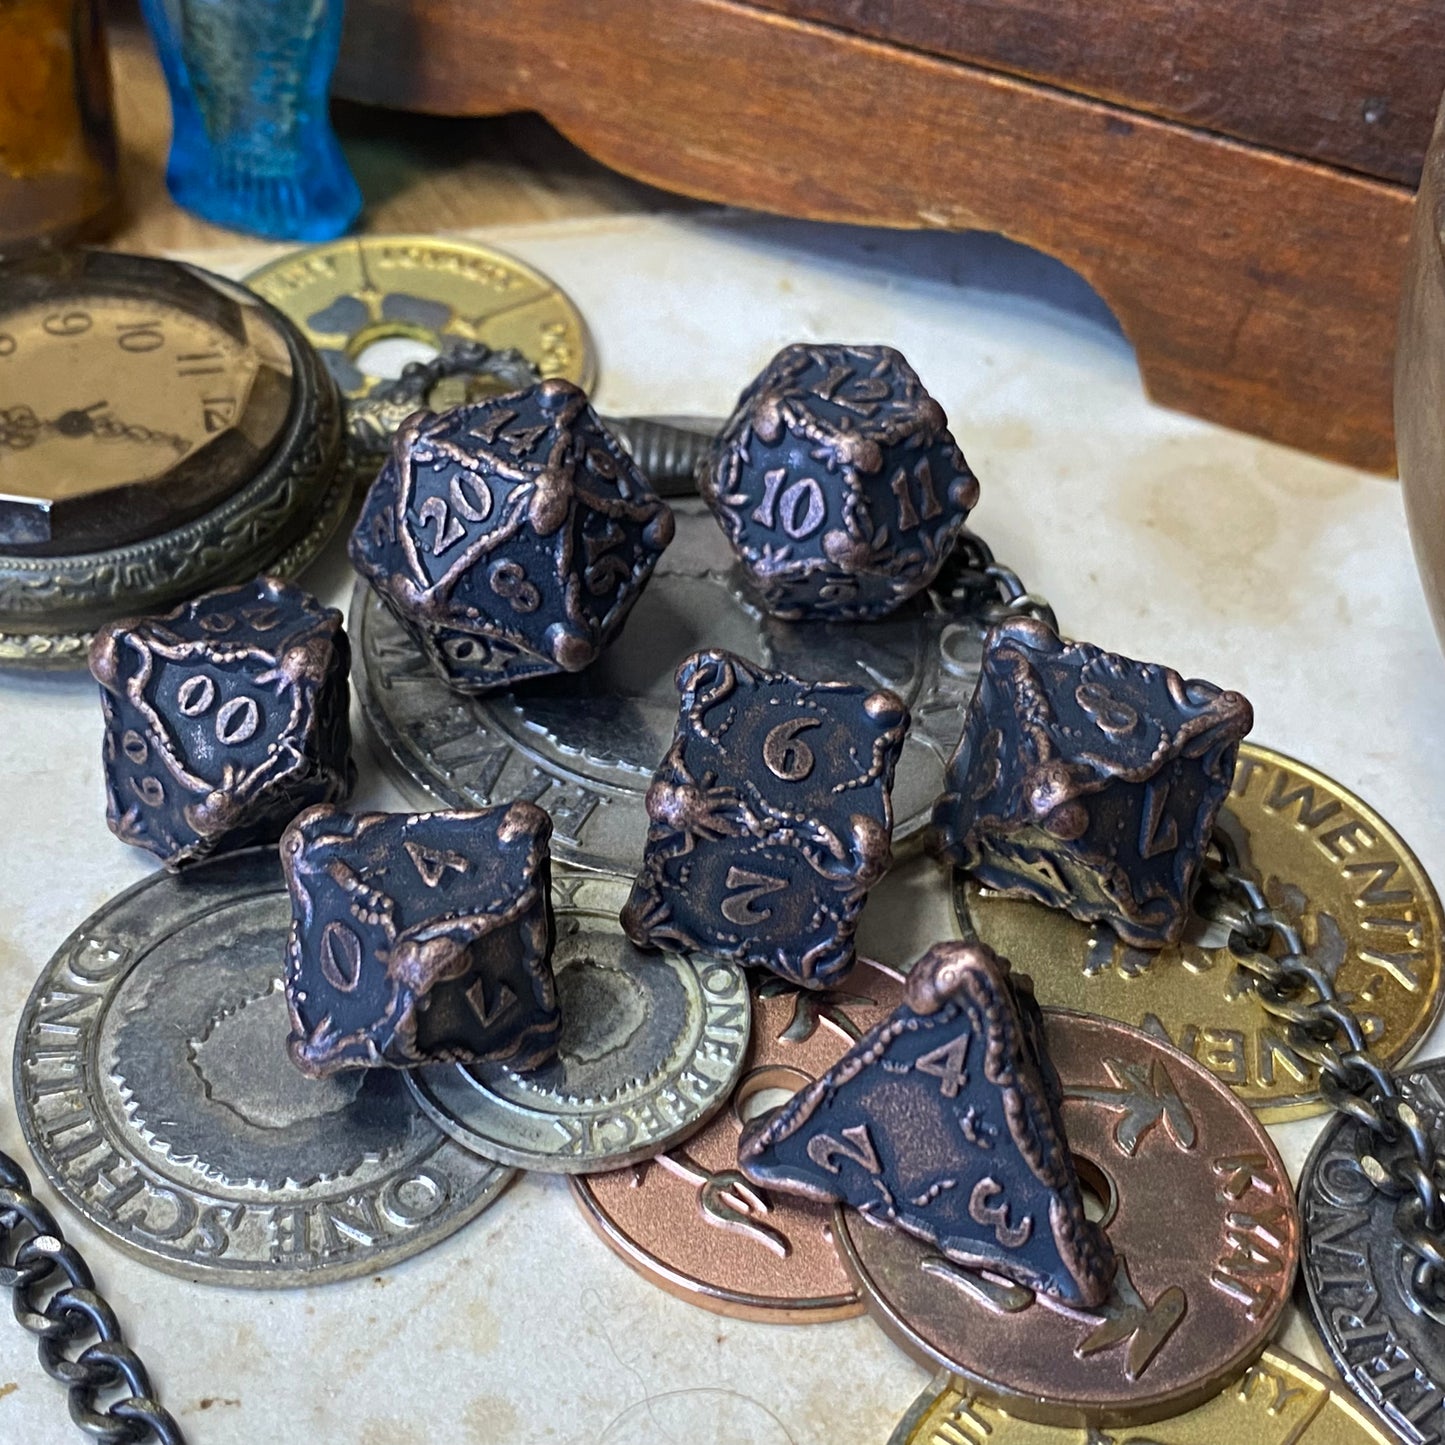 Aged Copper Plated Metal Octopus Dice